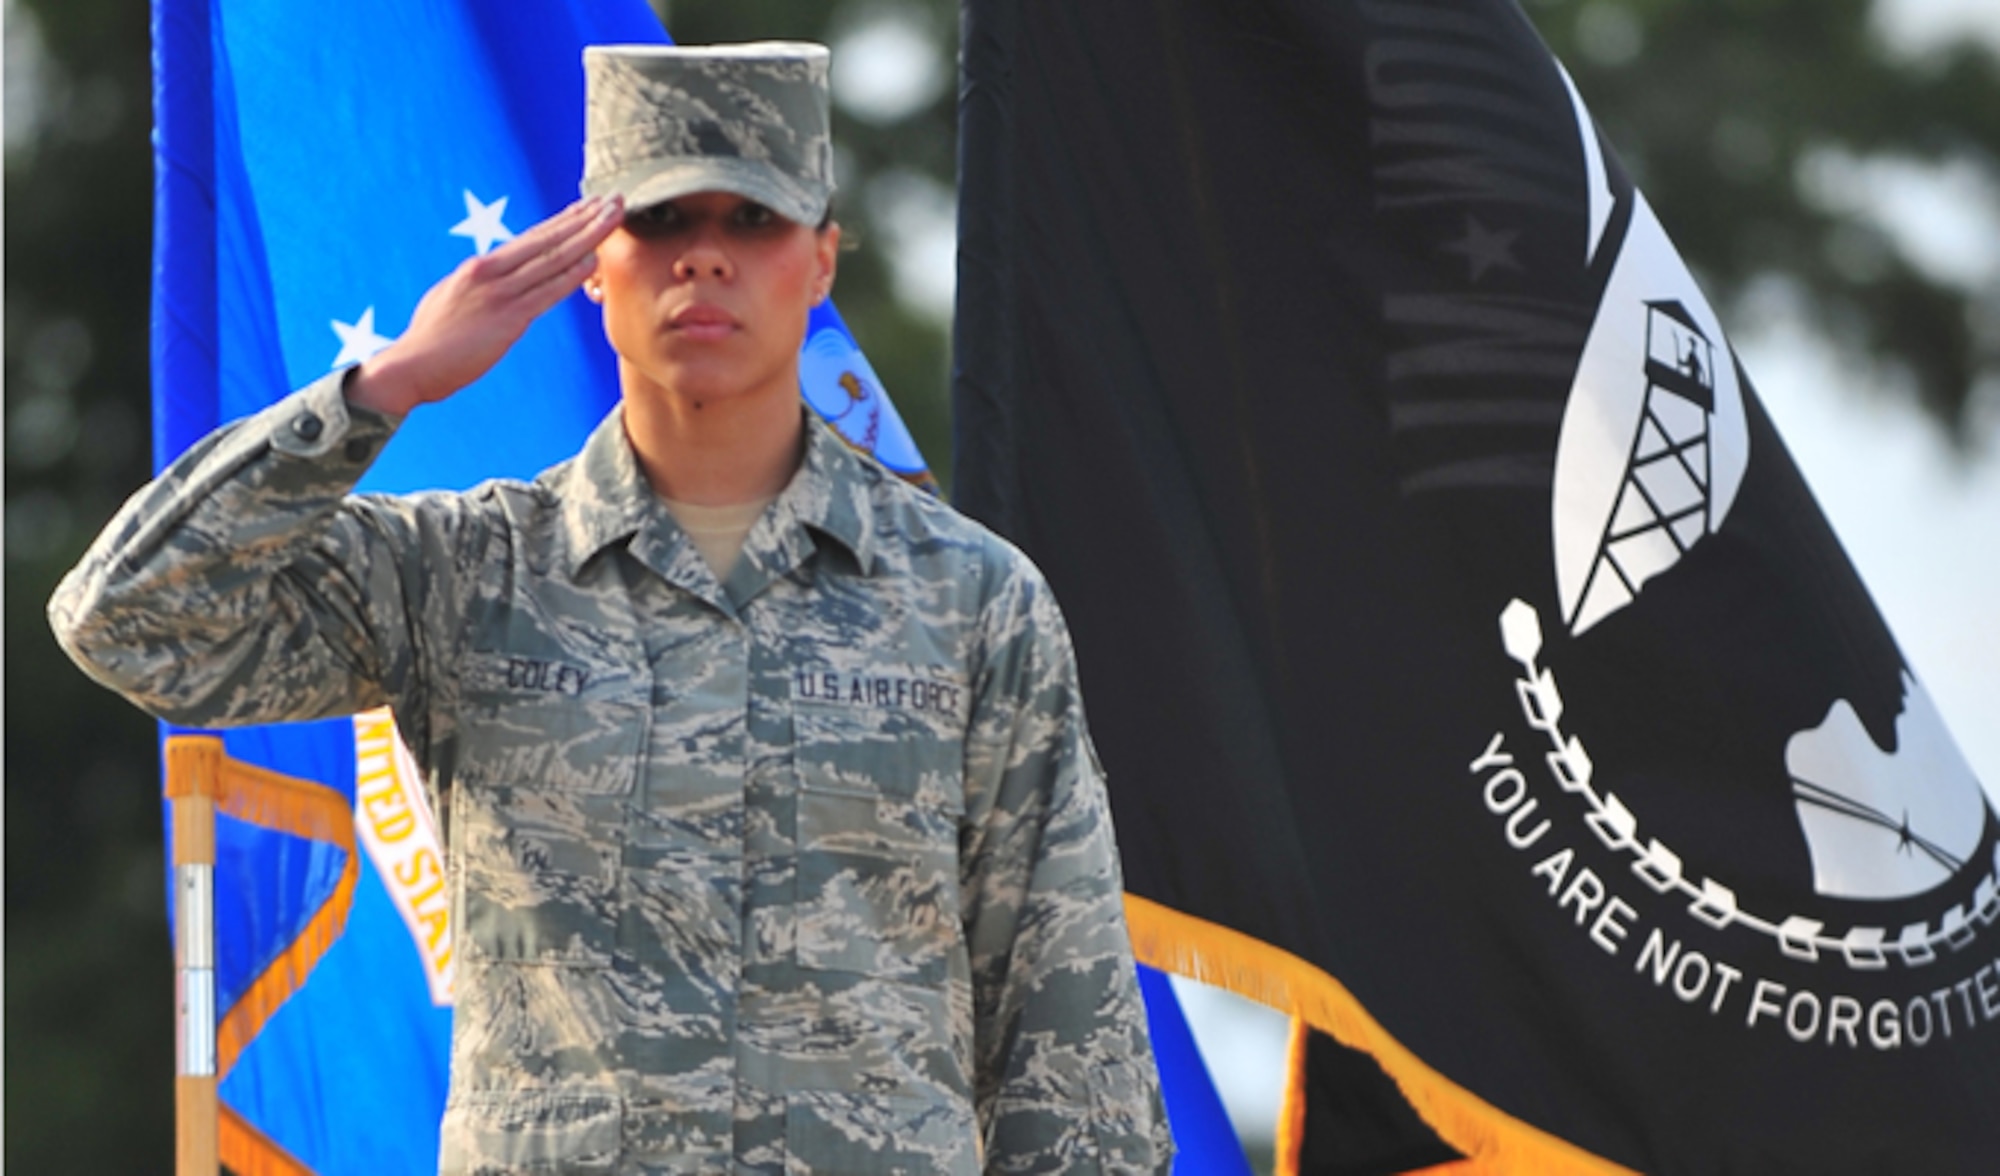 Senior Airman Amber Coley renders a salute as the U.S. military Code of Conduct is recited during the 4th Fighter Wing Prisoner of War/Missing in Action ceremony Sept. 20, 2013, at Seymour Johnson Air Force Base, N.C. The Code of Conduct, in six articles, addresses basic information useful to POWs when captured by hostile forces. Coley is 4th Medical Operations Squadron physical therapy technician. (U.S. Air Force photo/Senior Airman Aubrey White)